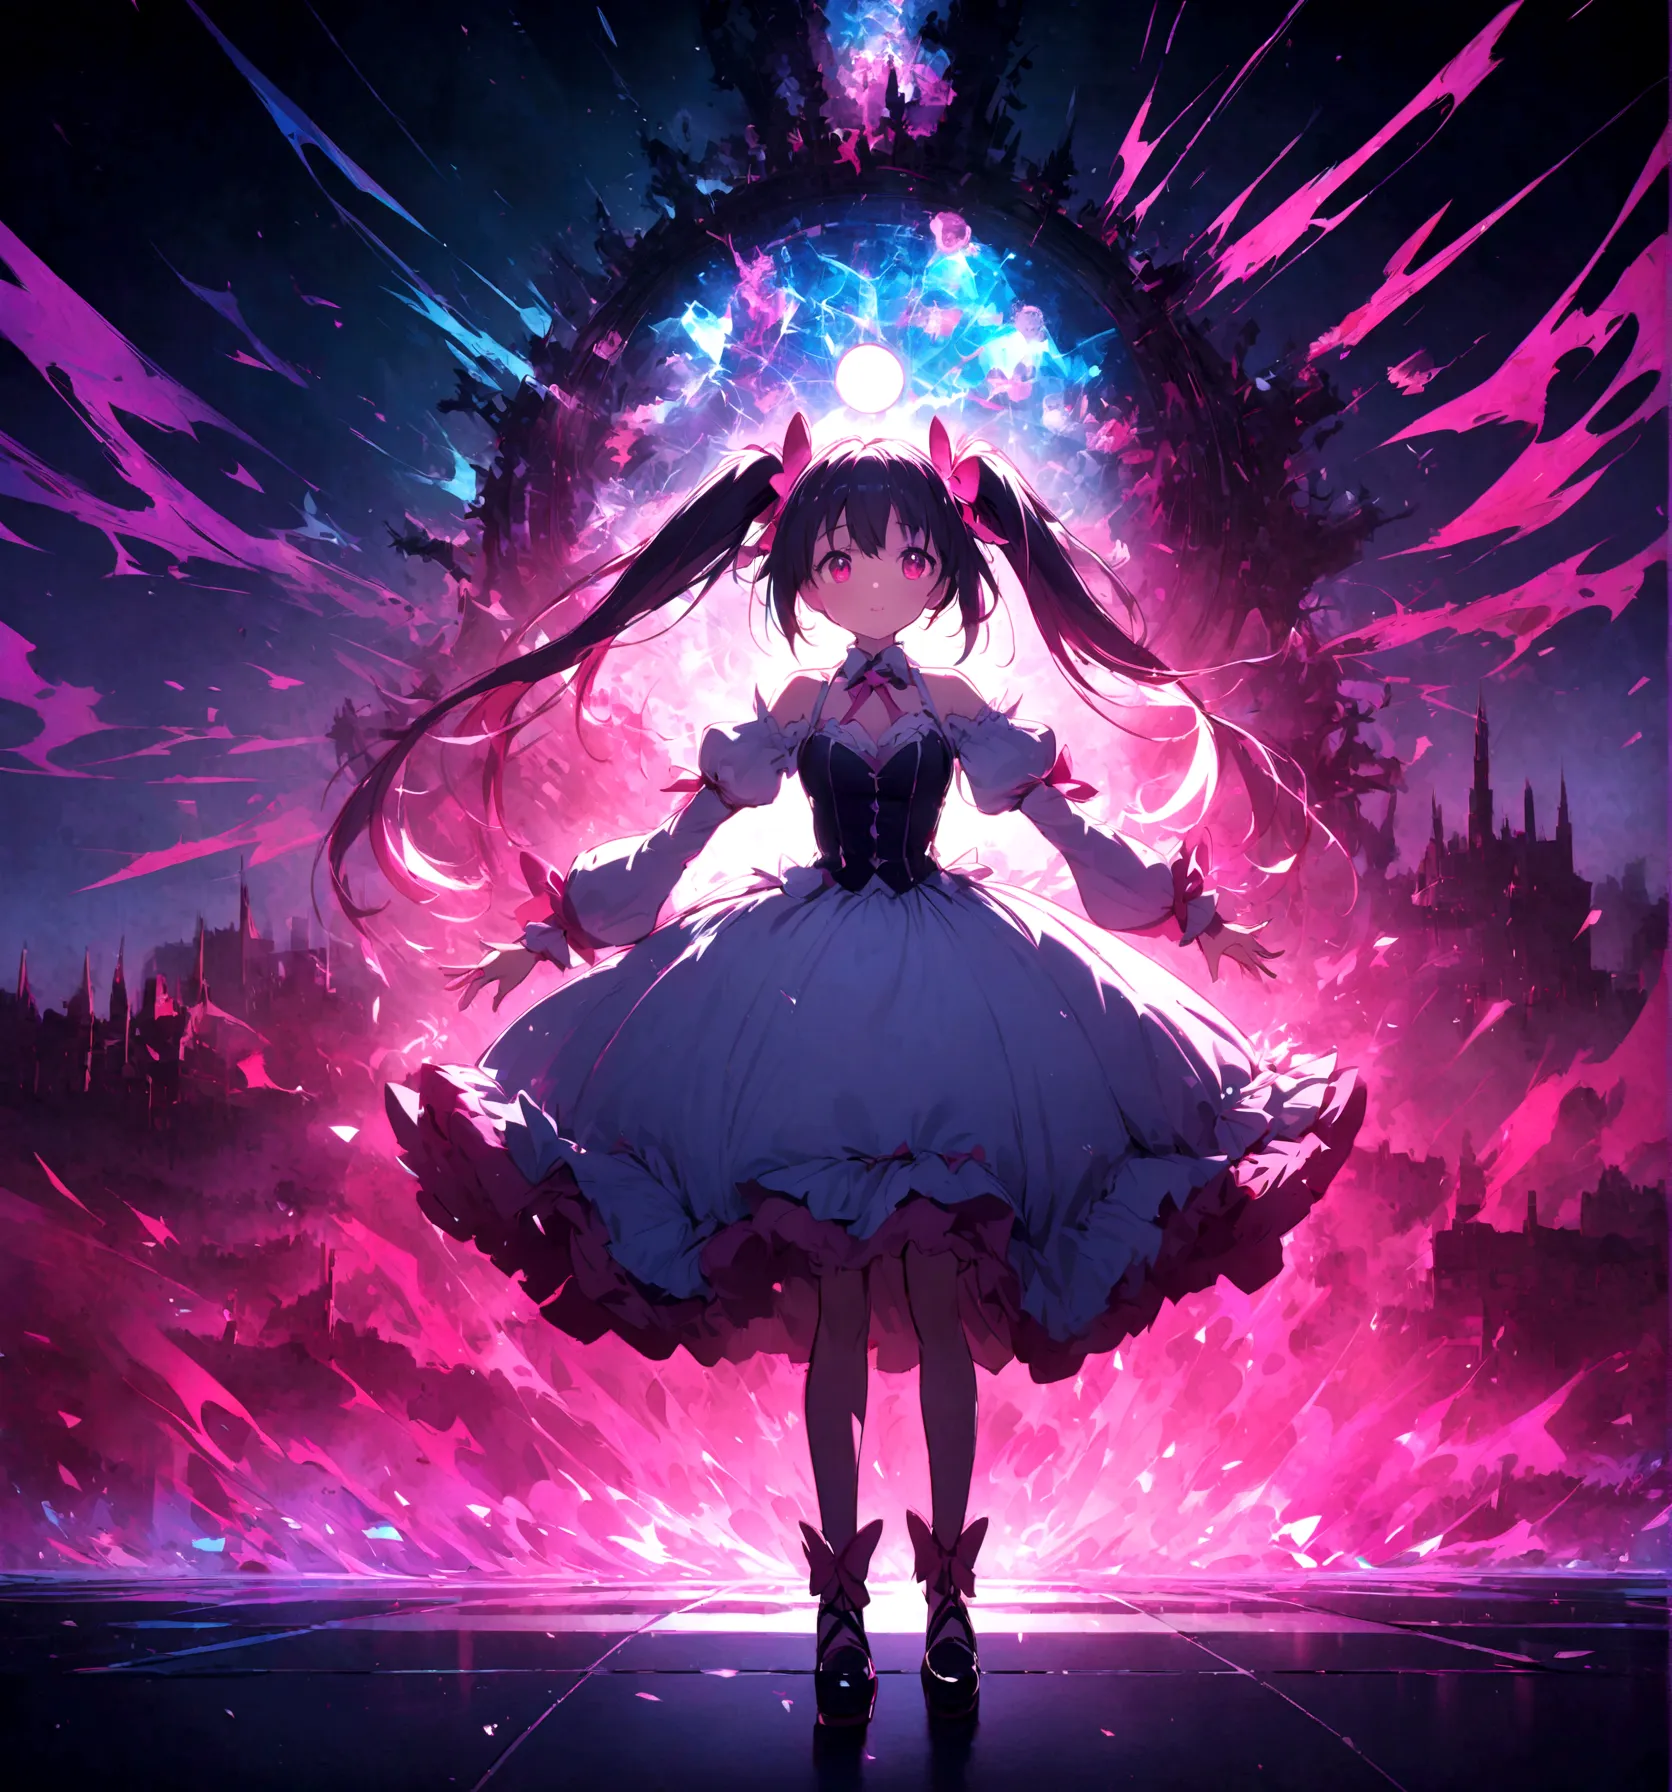 kaname_madoka\(Puella Magi Madoka Magica,magical girl style,pink twin tails hair,pink bows,open shoulder dress with frill,tie at neck,white grove,red juwel at cleavage\) is standing with confused face in the center showing full body to viewer,geometric and...